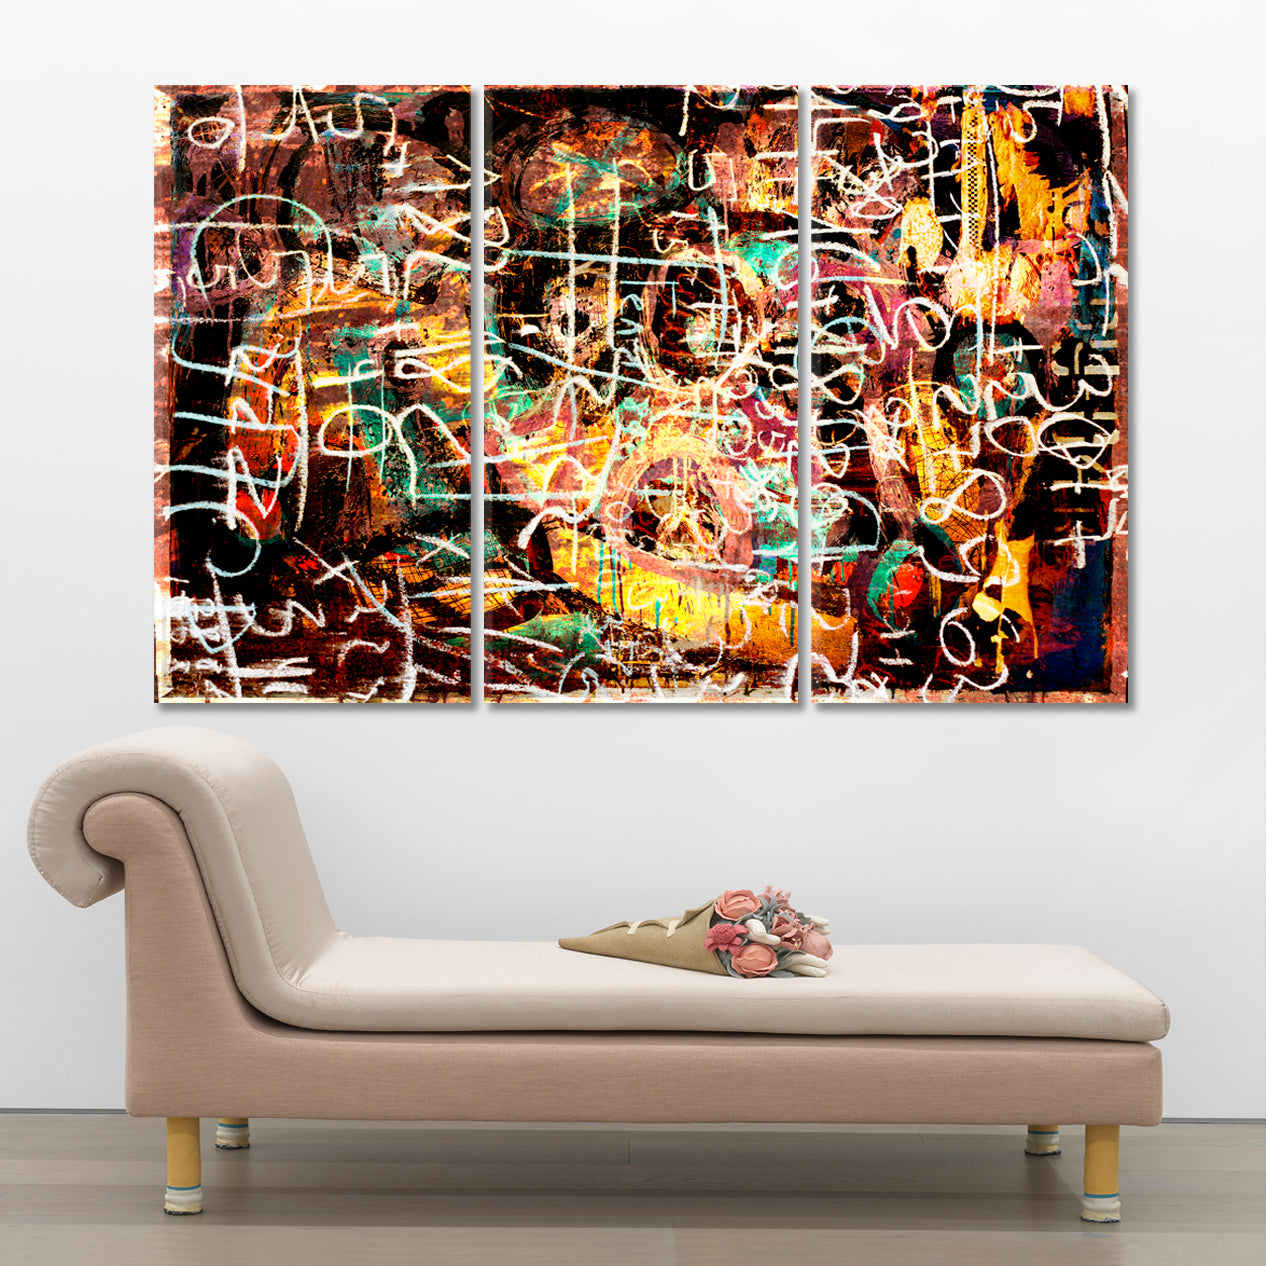 ABSTRACT EXPRESSION Contemporary Art Artesty 3 panels 36" x 24" 